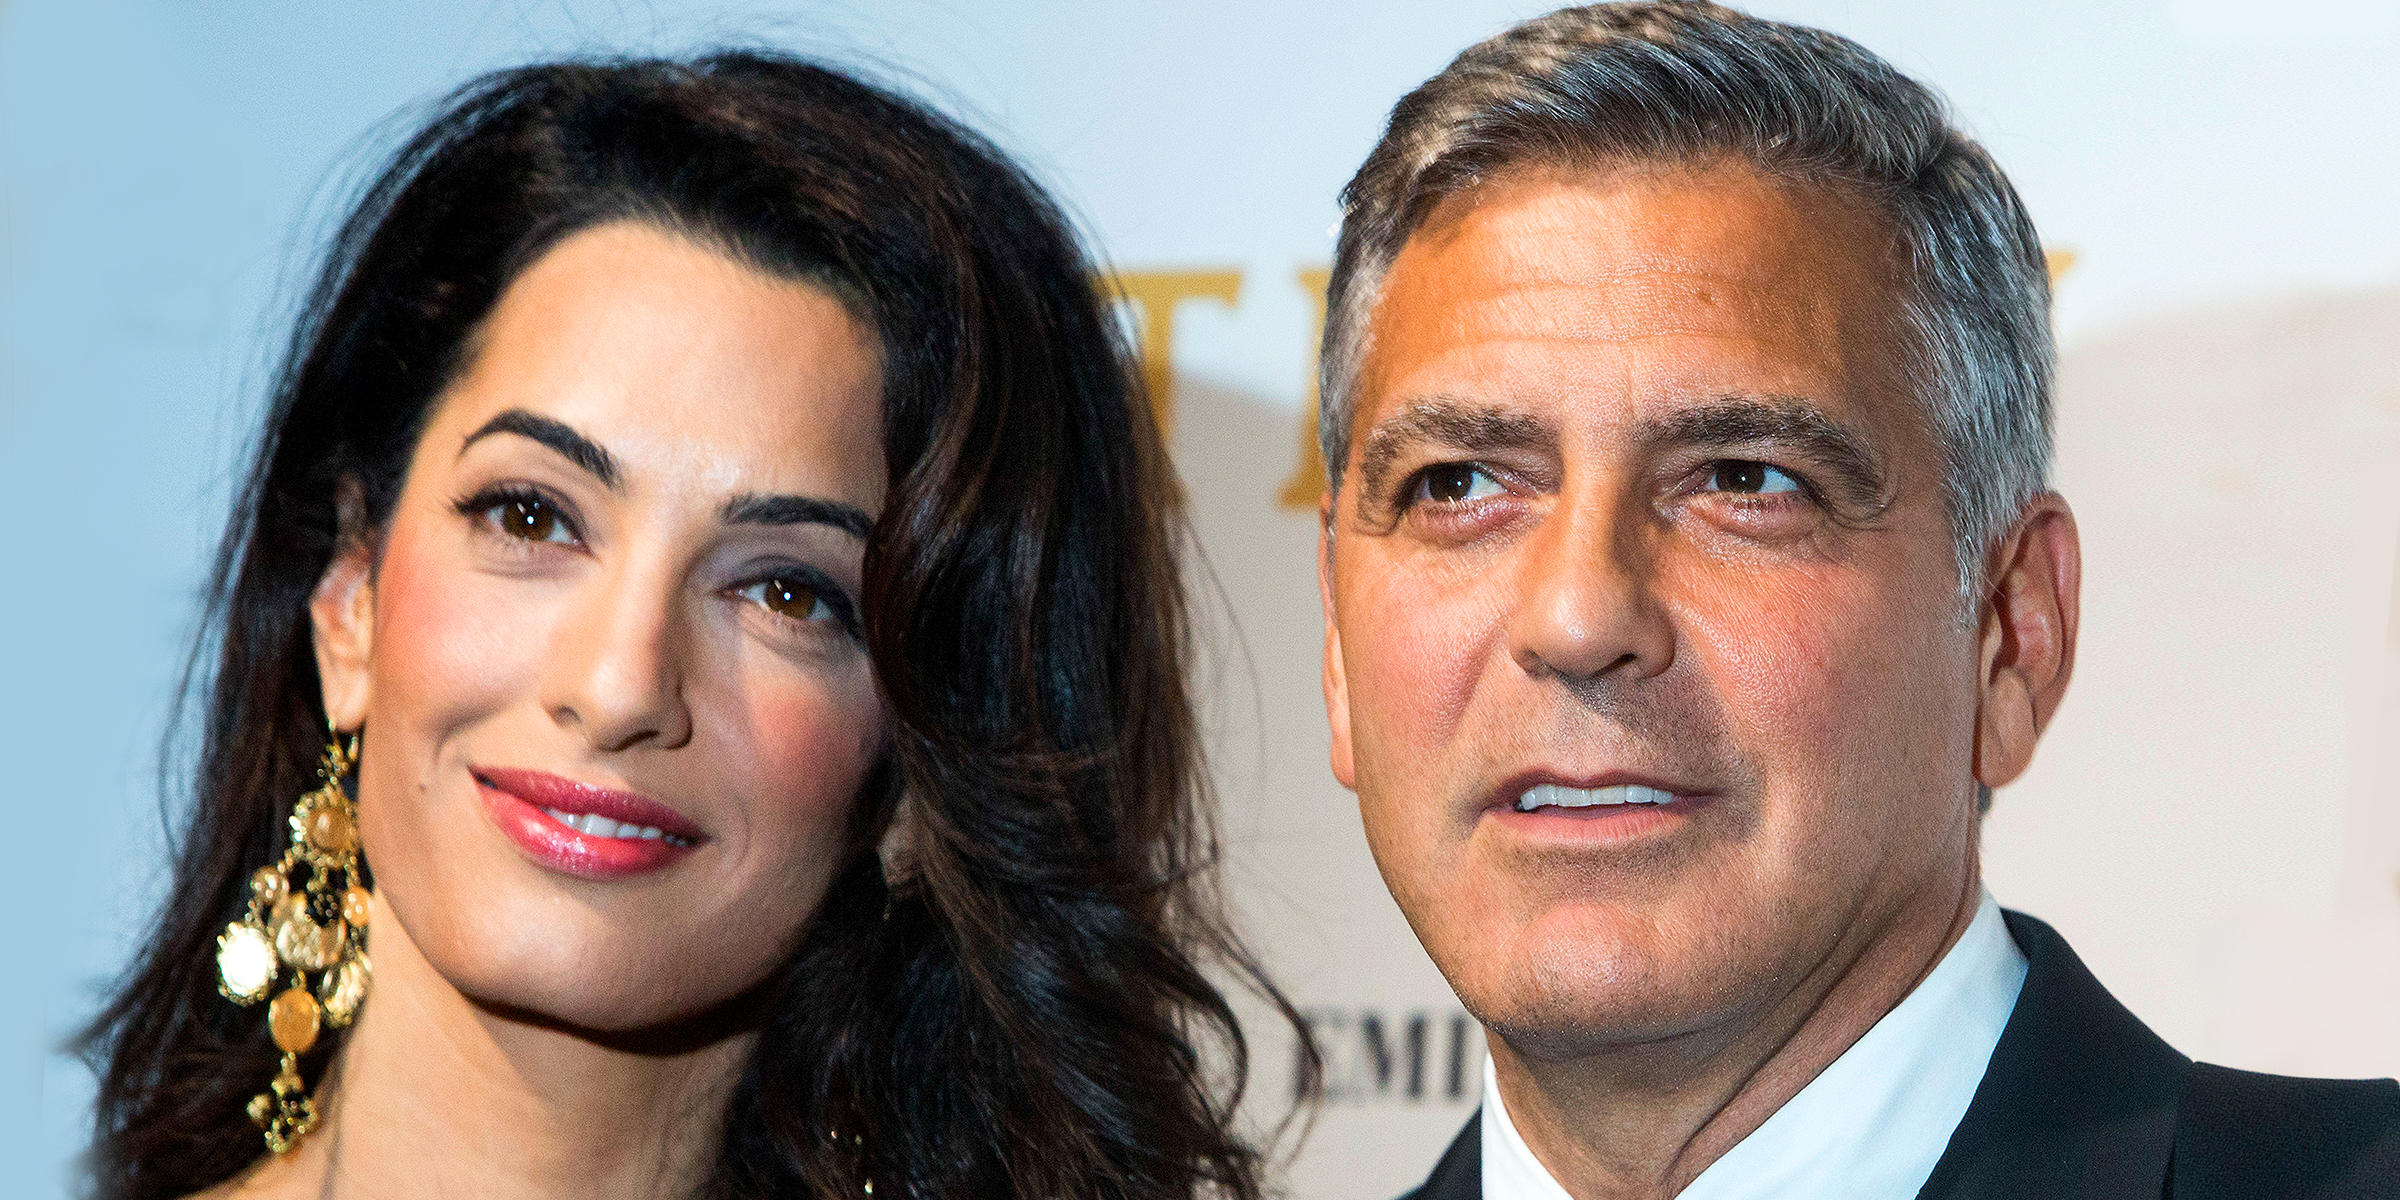 Amal and George Clooney | Source: Getty Images